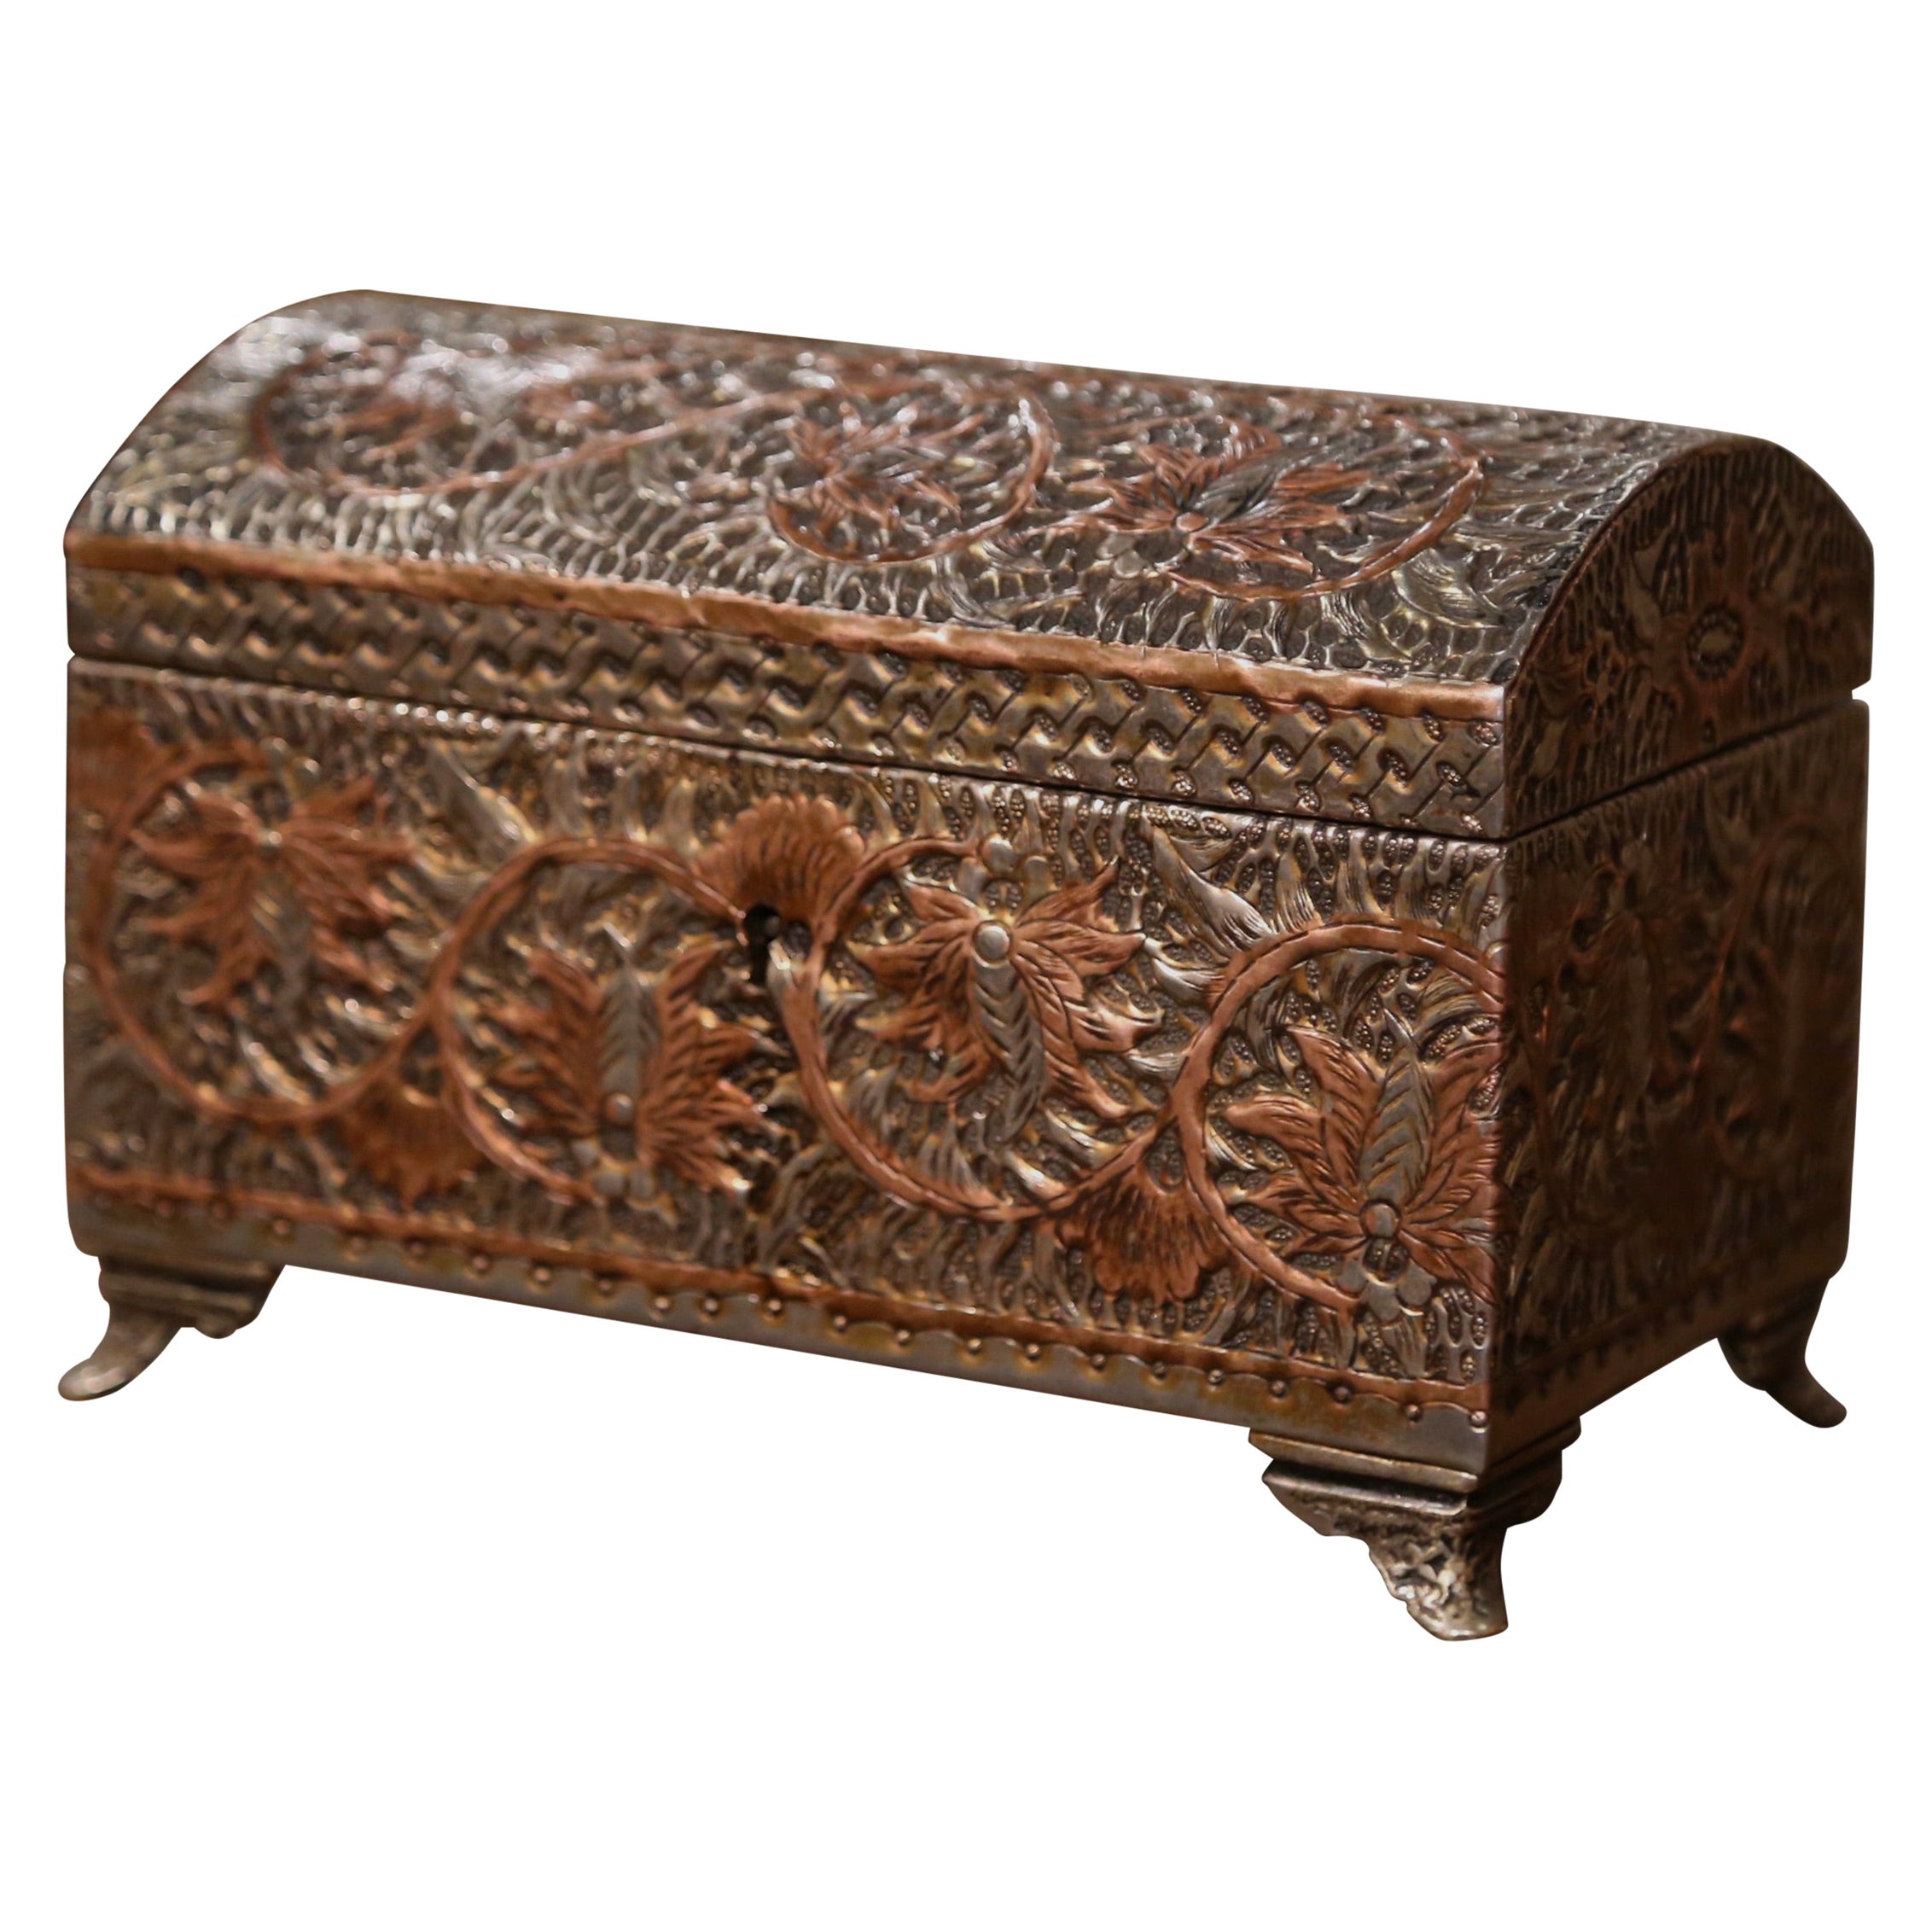 19th Century French Gothic Brass & Copper Jewelry Box with Repousse Leaf Motifs For Sale